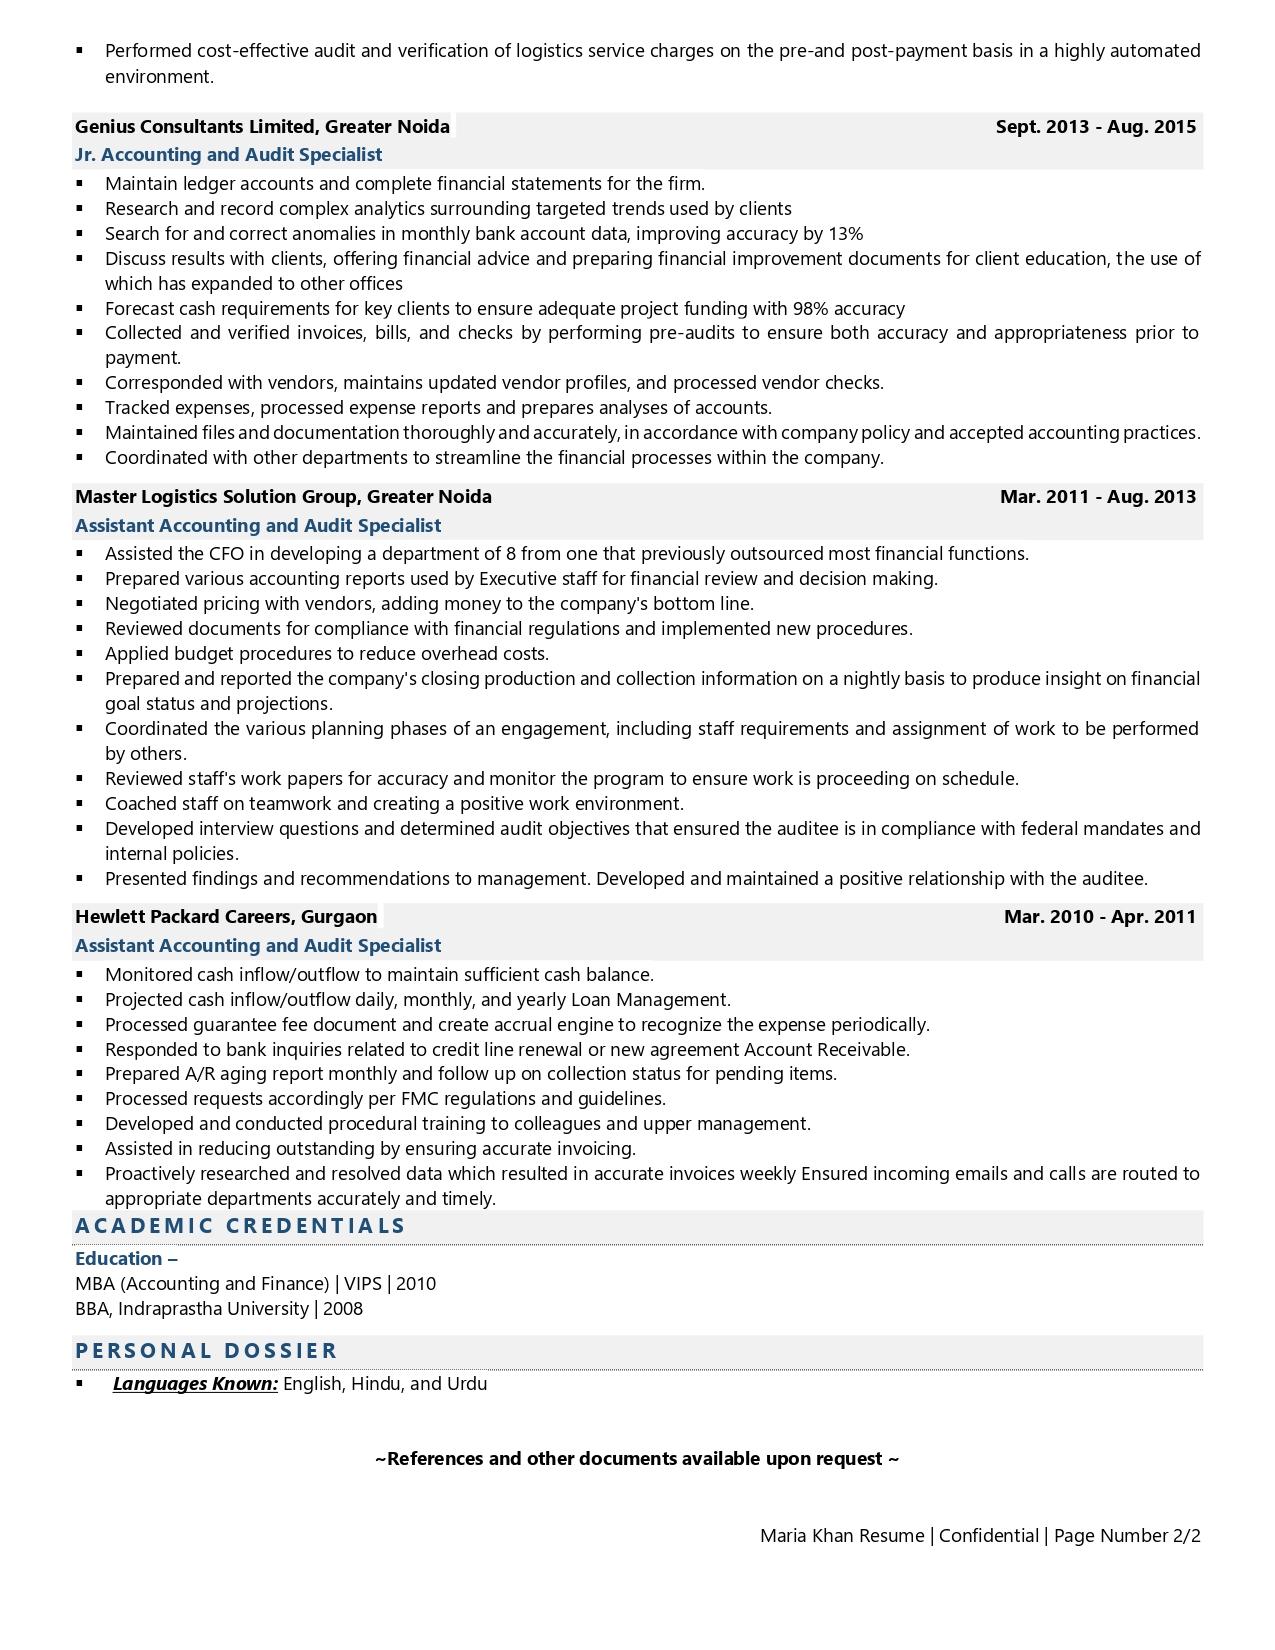 Accounting and Audit Specialist - Resume Example & Template